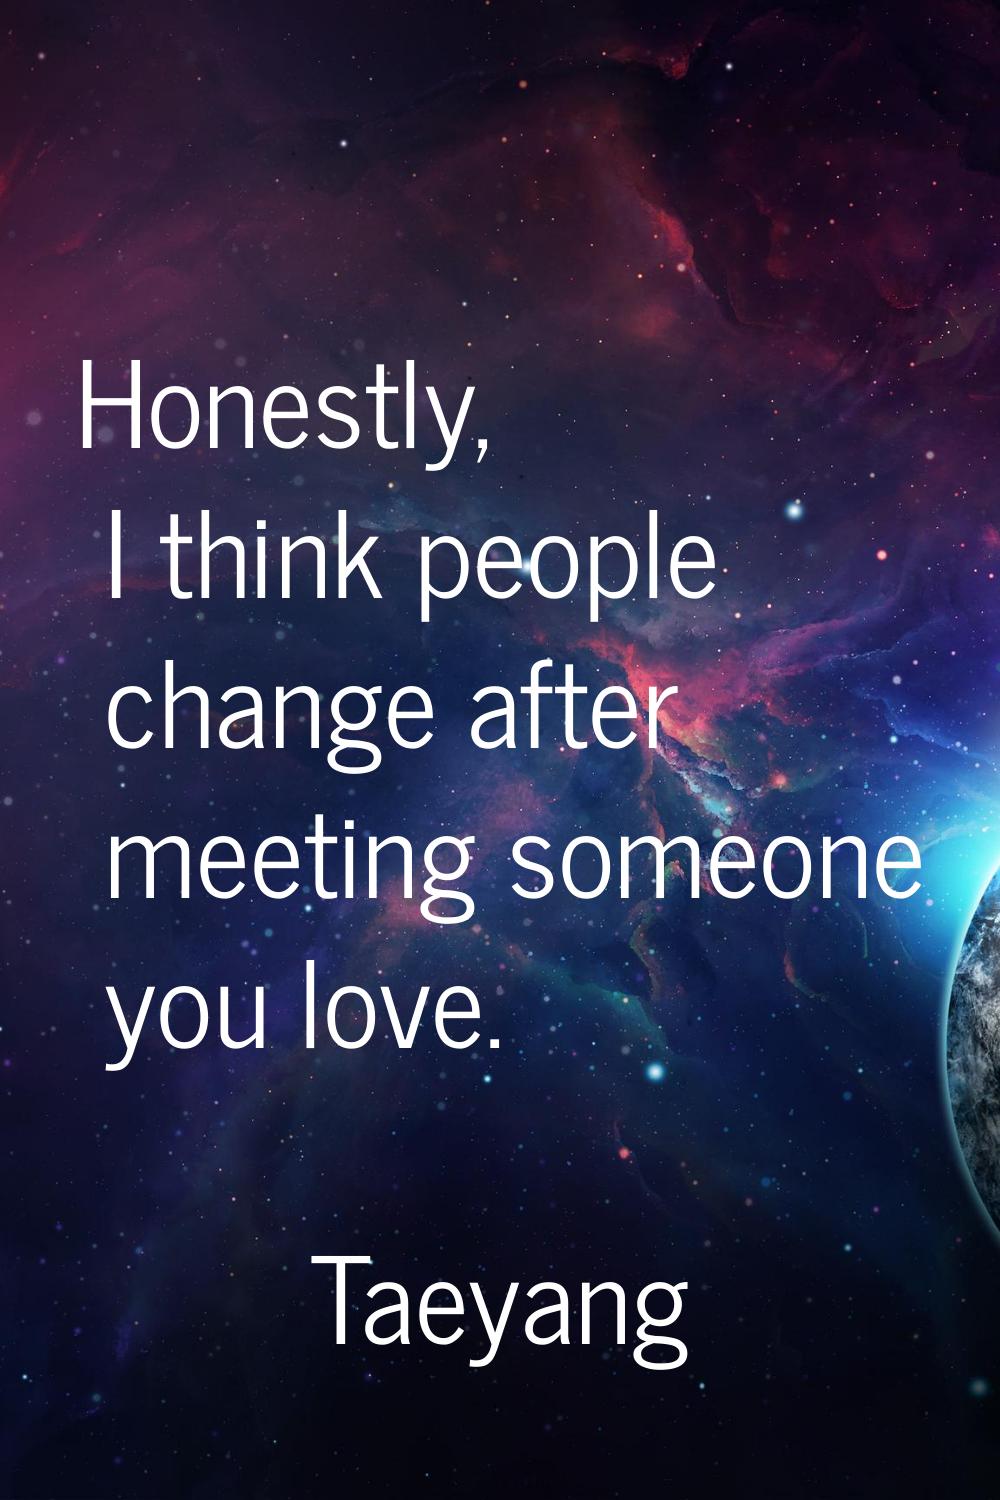 Honestly, I think people change after meeting someone you love.